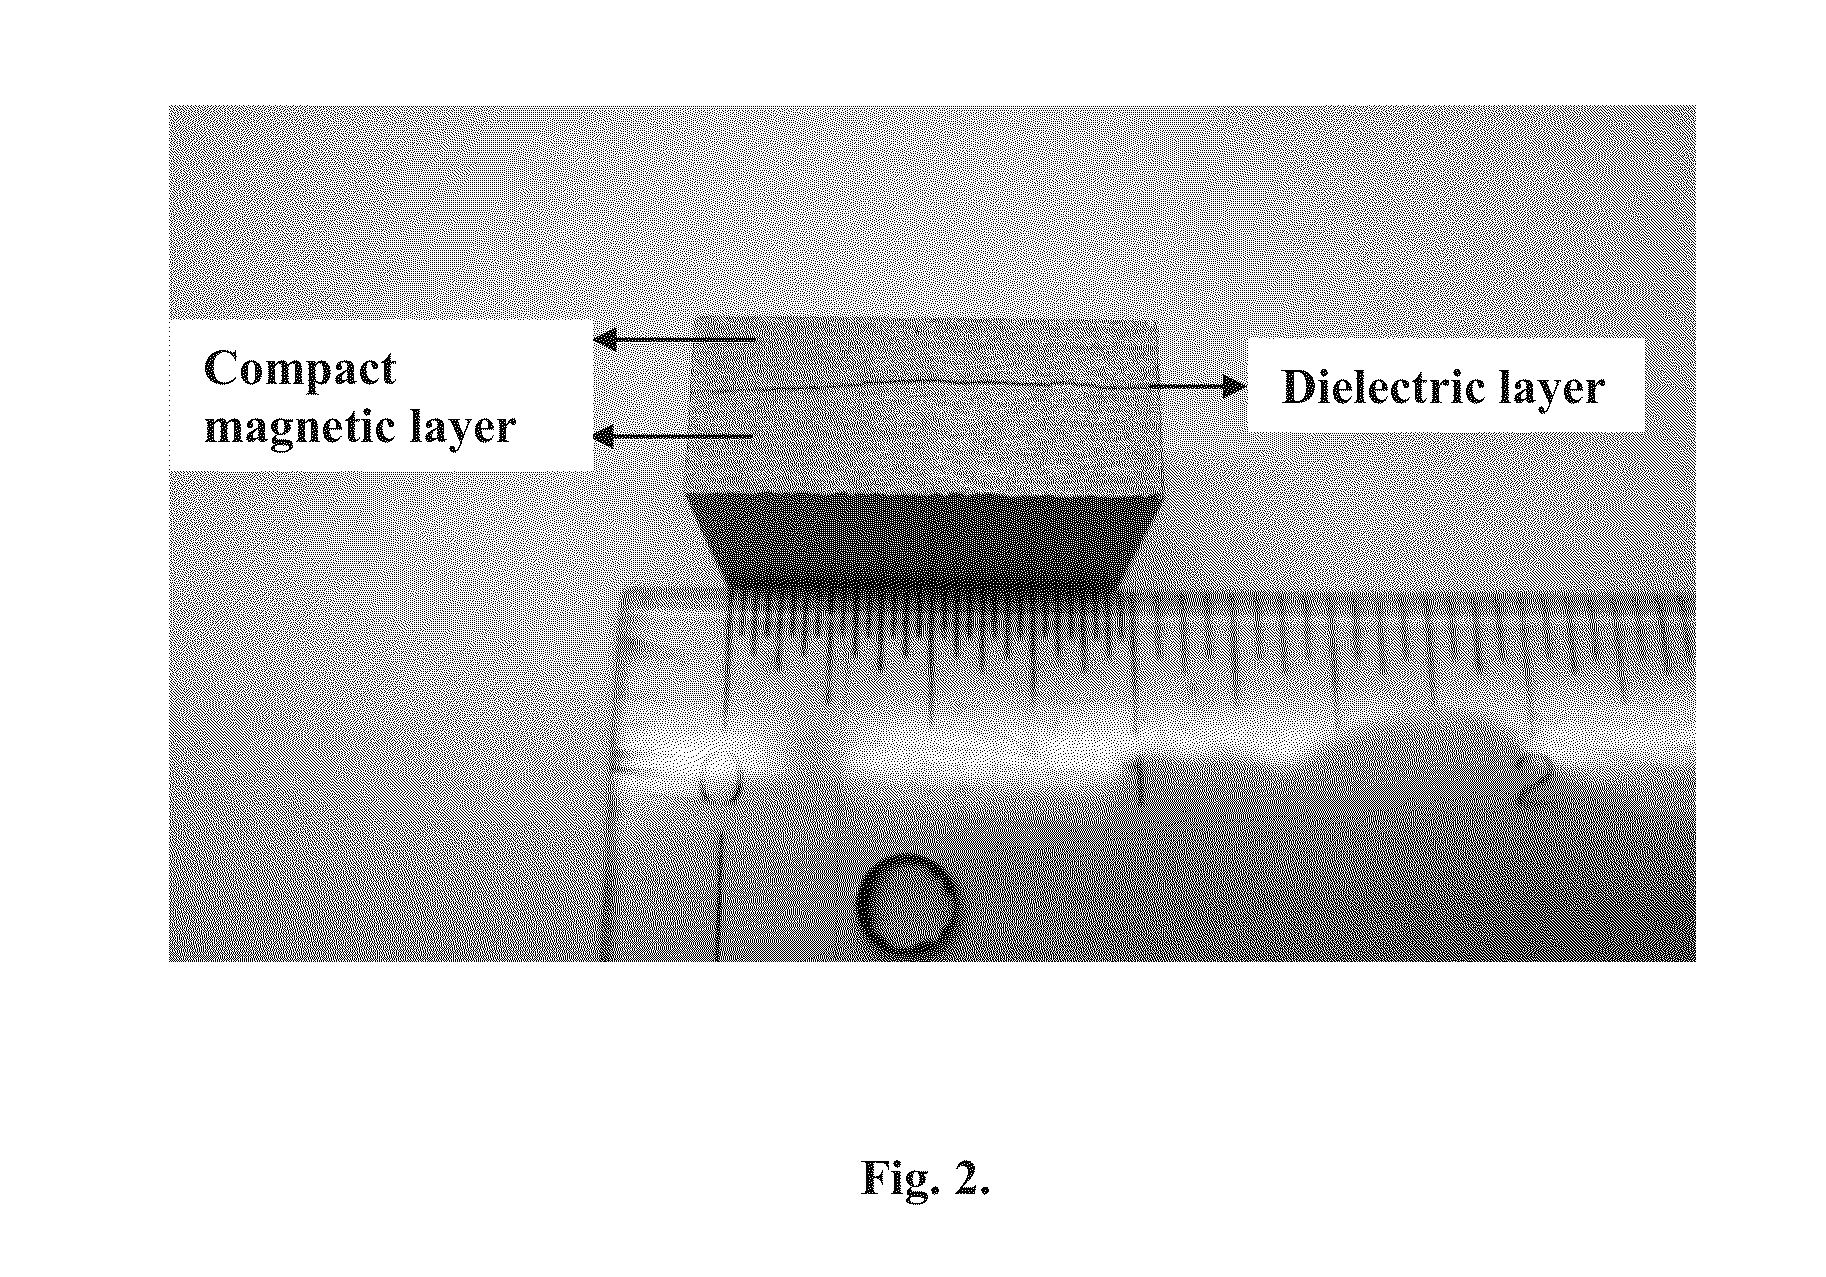 Methods for sequentially laminating rare earth permanent magnets with suflide-based dielectric layer